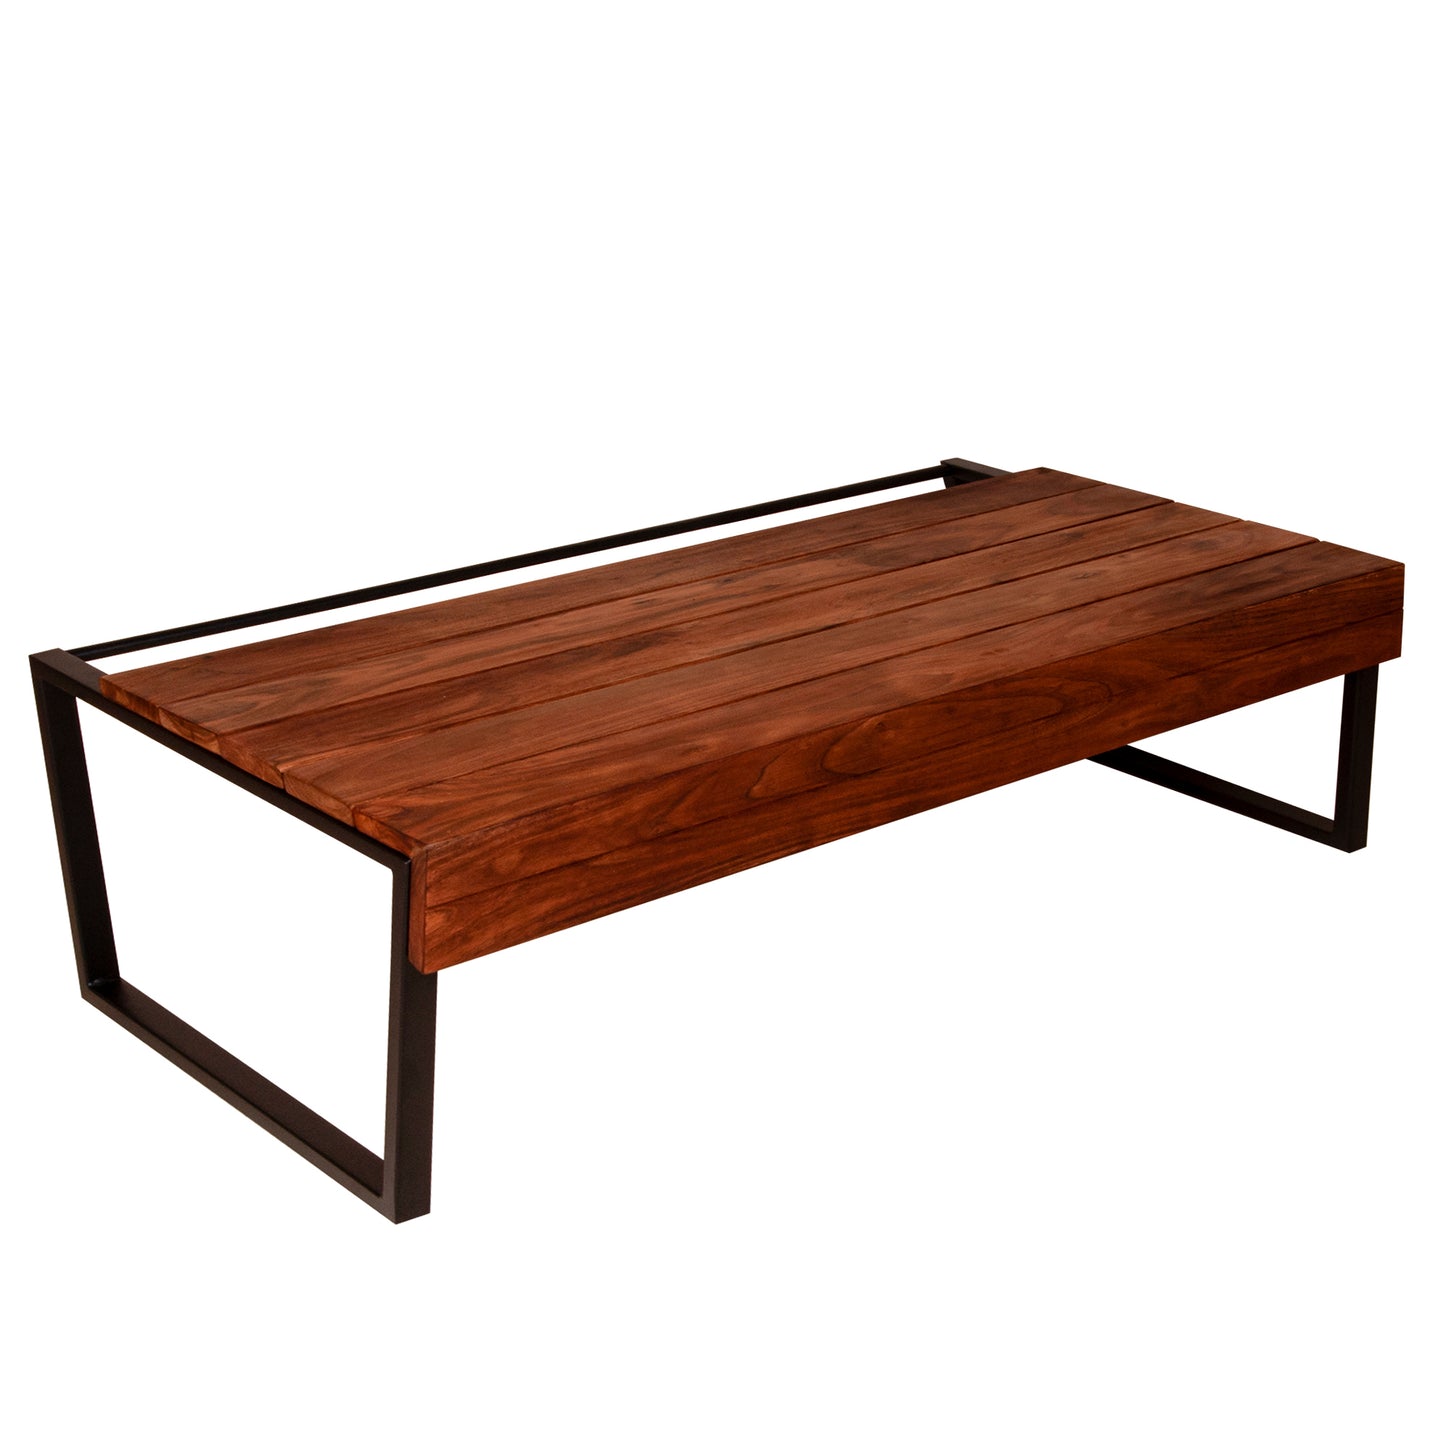 Rectangular Industrial-Style Coffee Table with Acacia Wood Top and Metal Frame, Warm Brown and Black